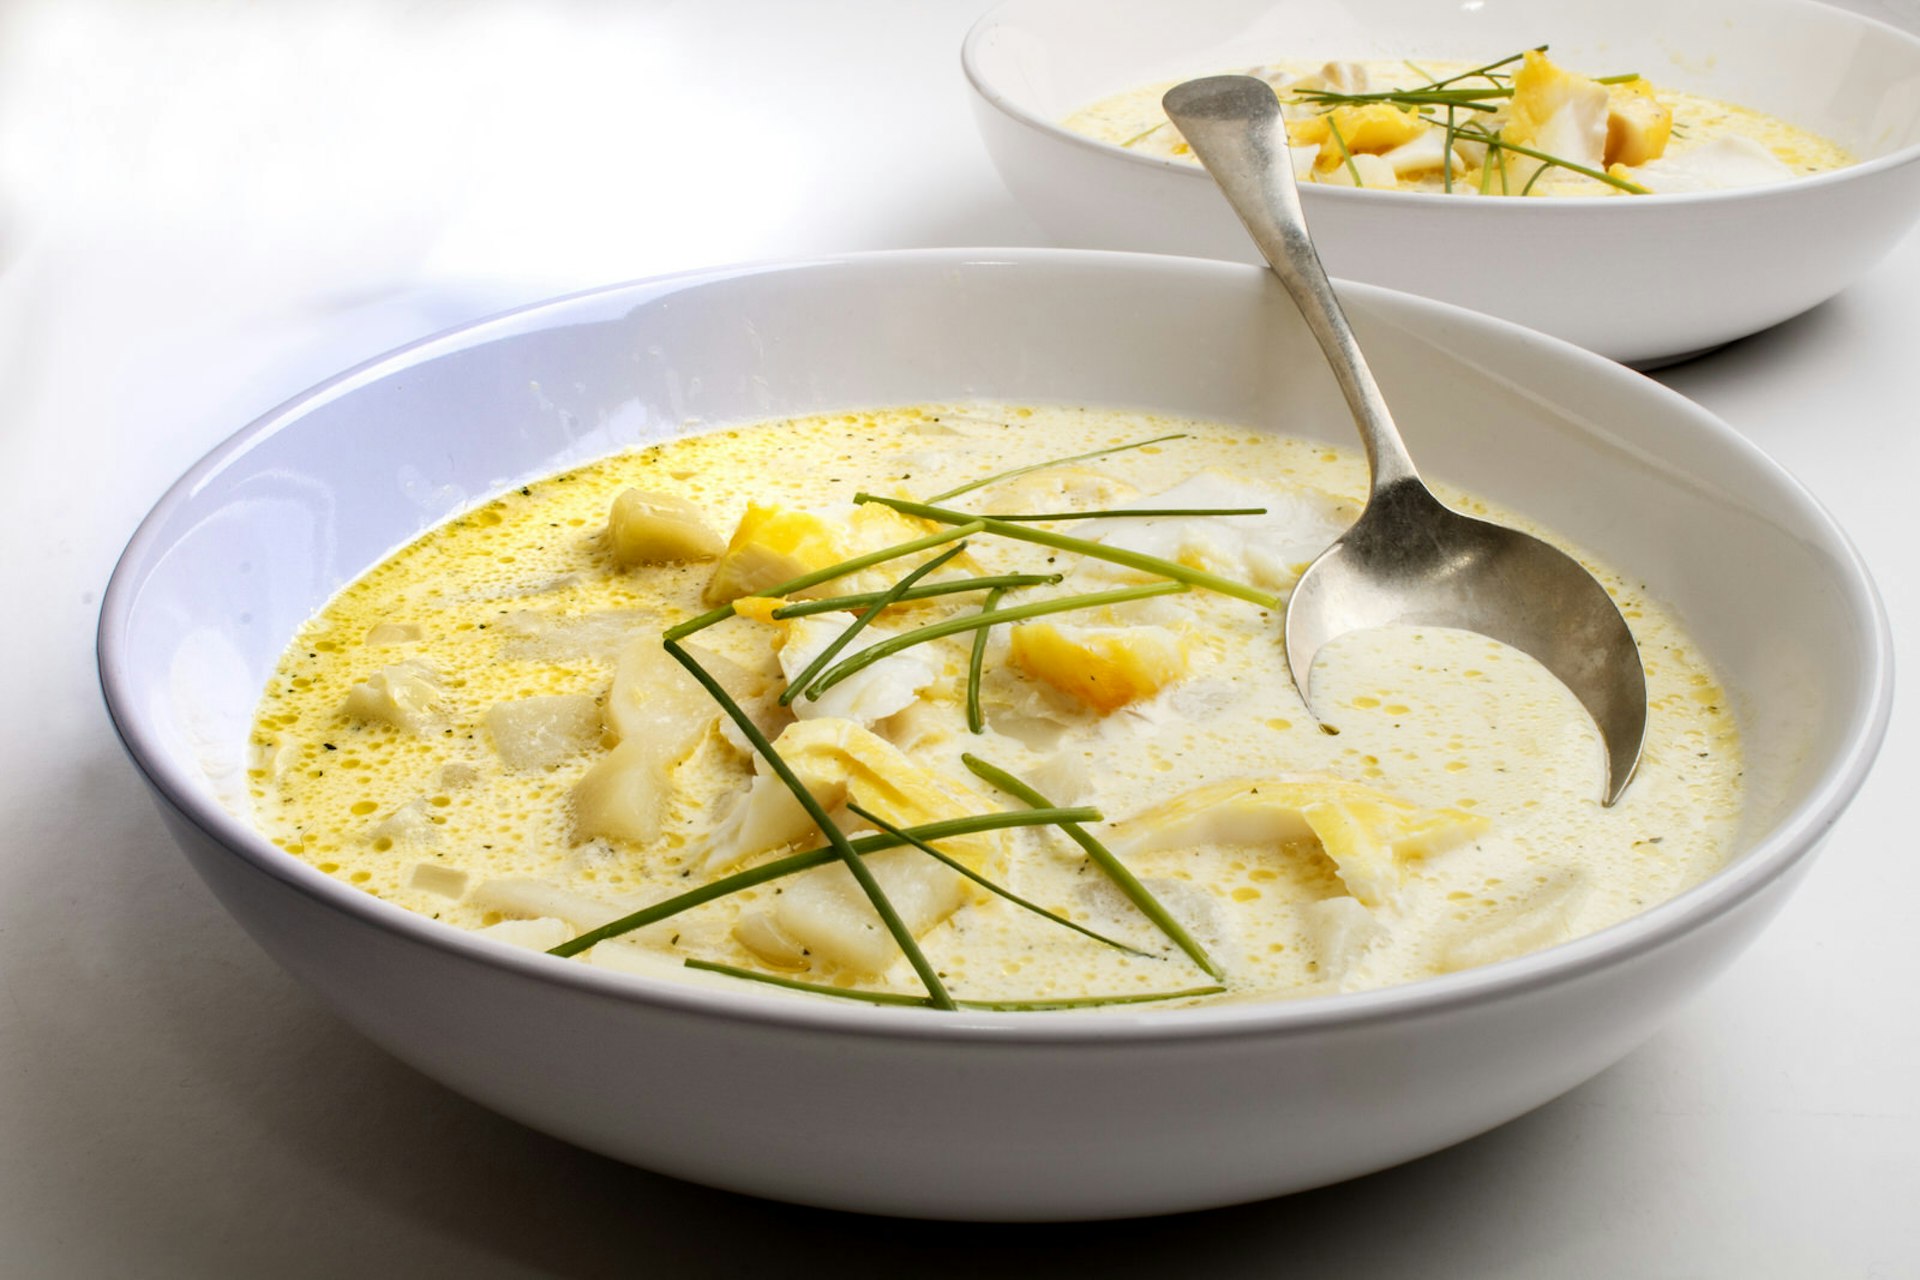 cullen skink, made with smoked fish and potato, a specialty from scotland in a deep plate